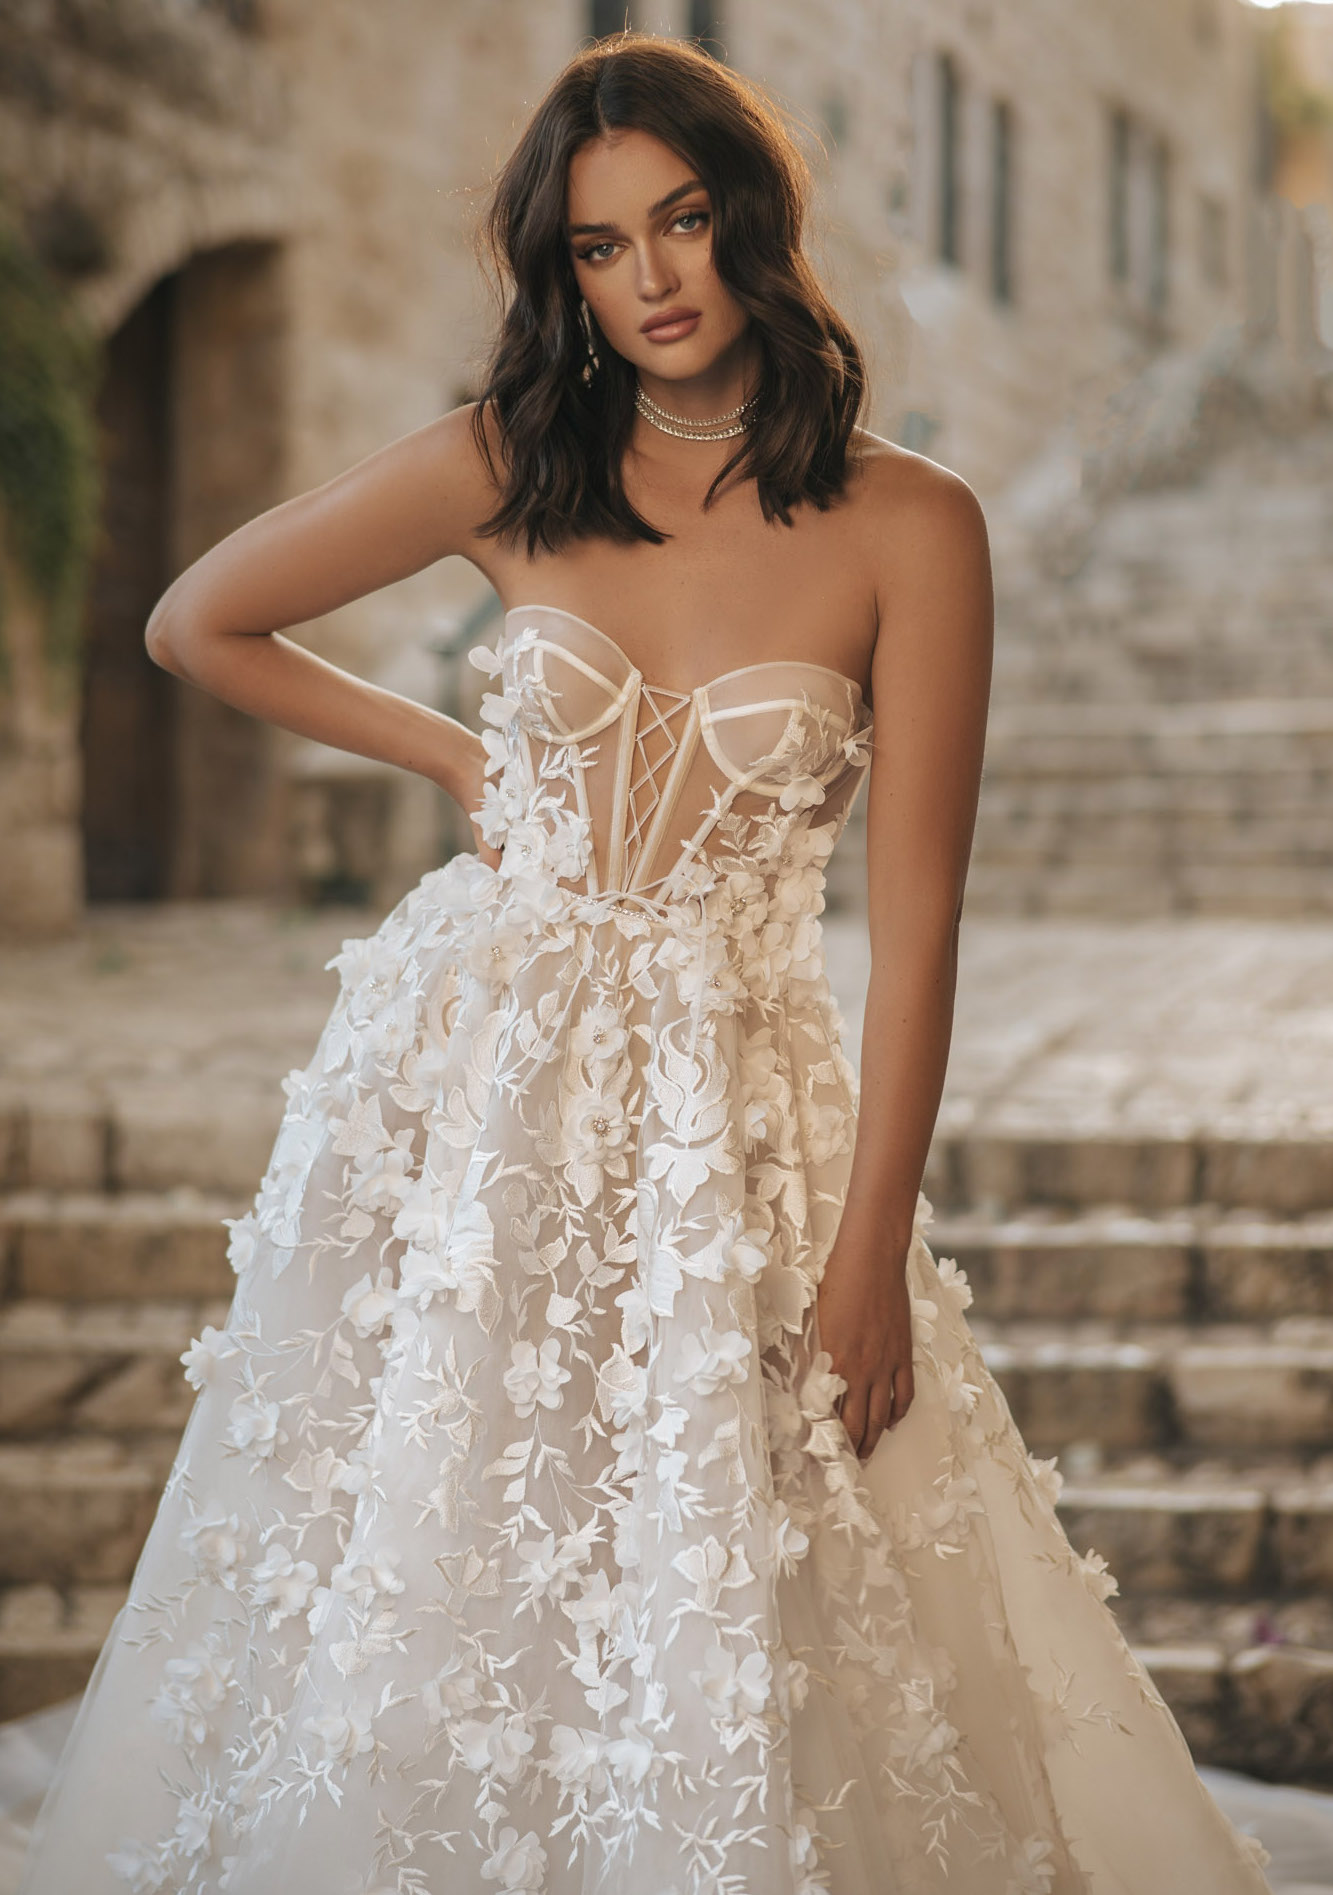 A bride wears a Berta gown that has a flowy skirt with 3D embellished flowers stitched onto it.